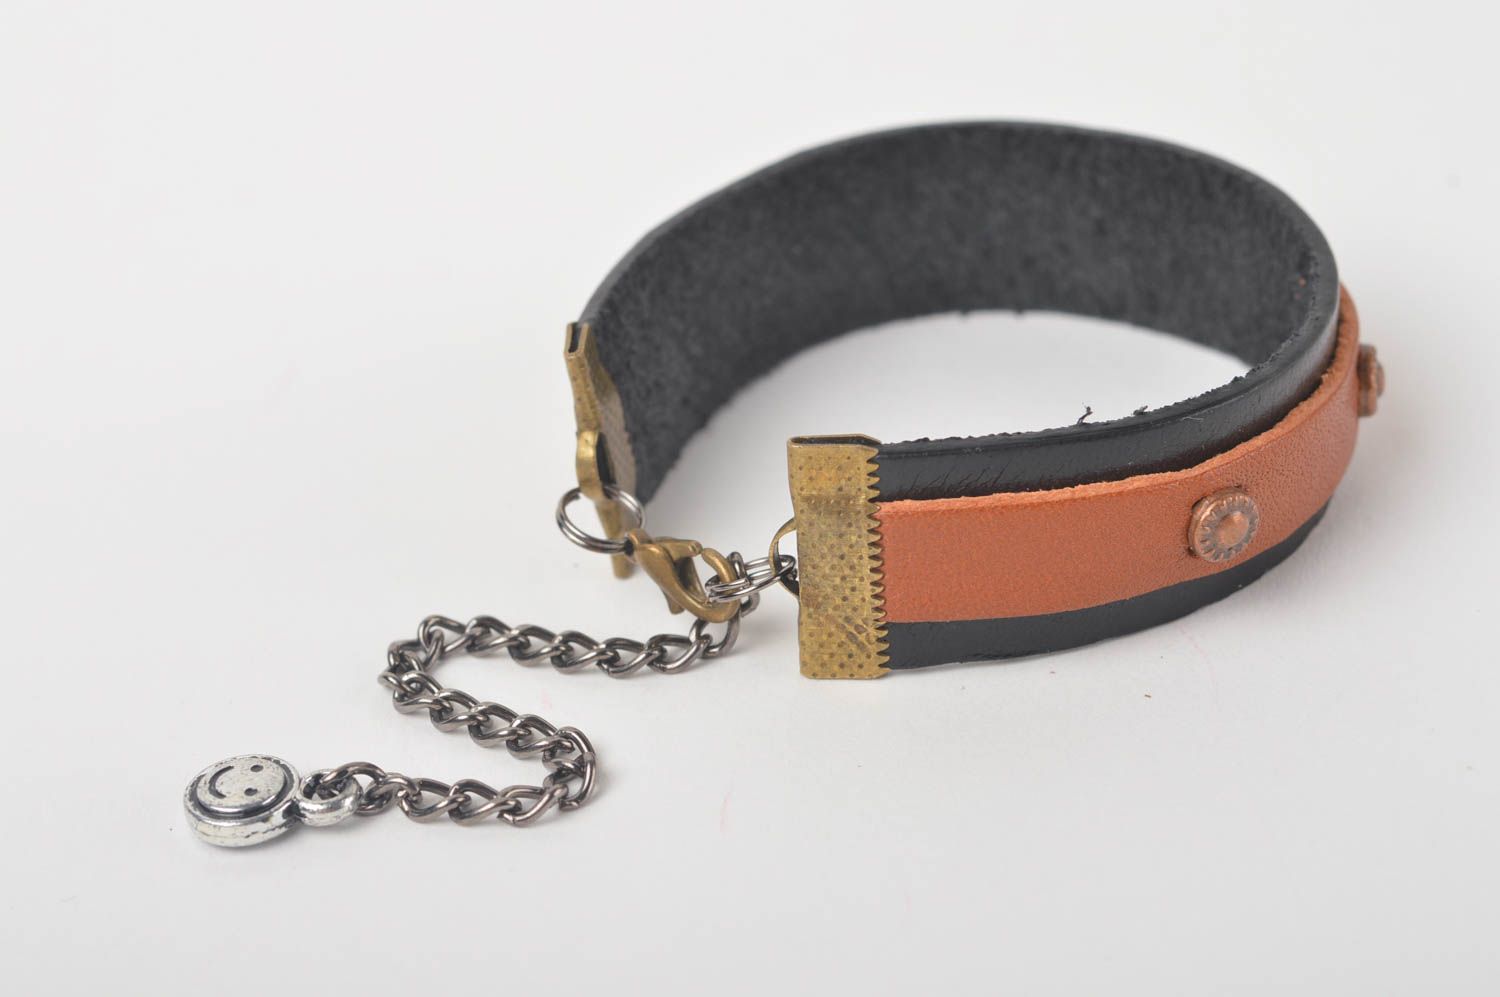 Stylish handmade leather bracelet leather goods gifts for her gifts for him photo 5